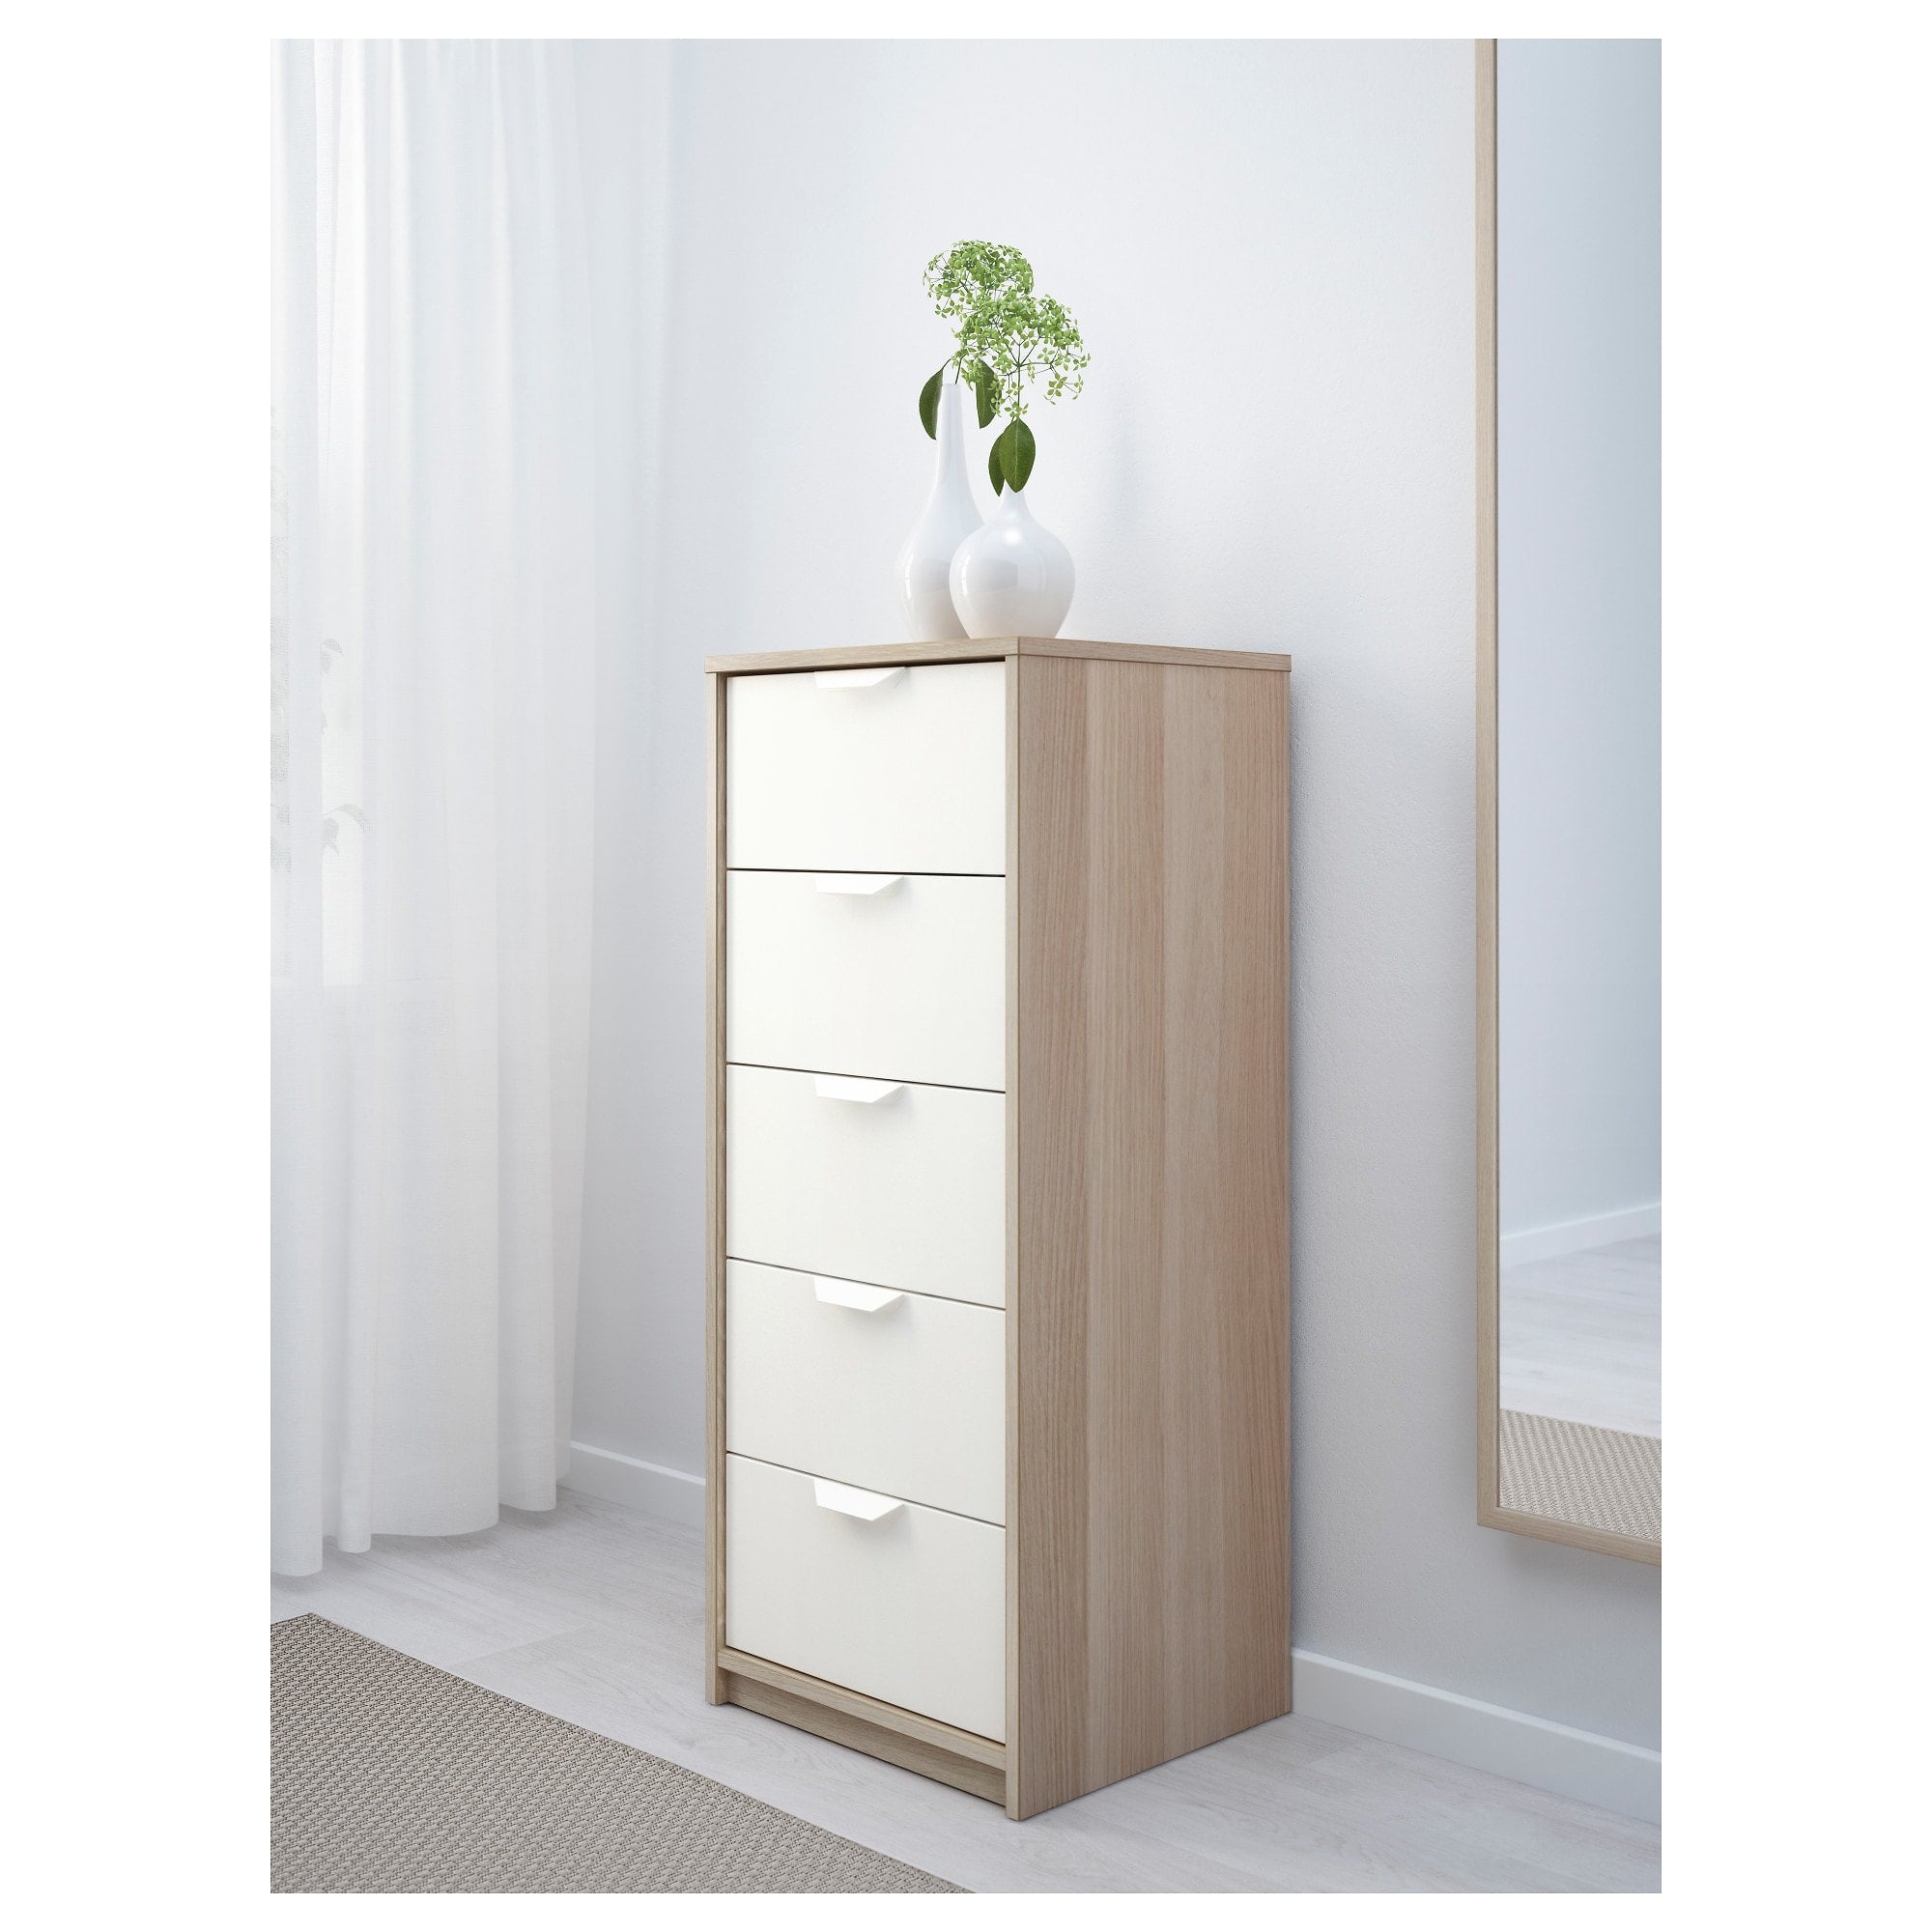 Askvoll Five Drawer Chest Ikea Has All Of The Space Saving